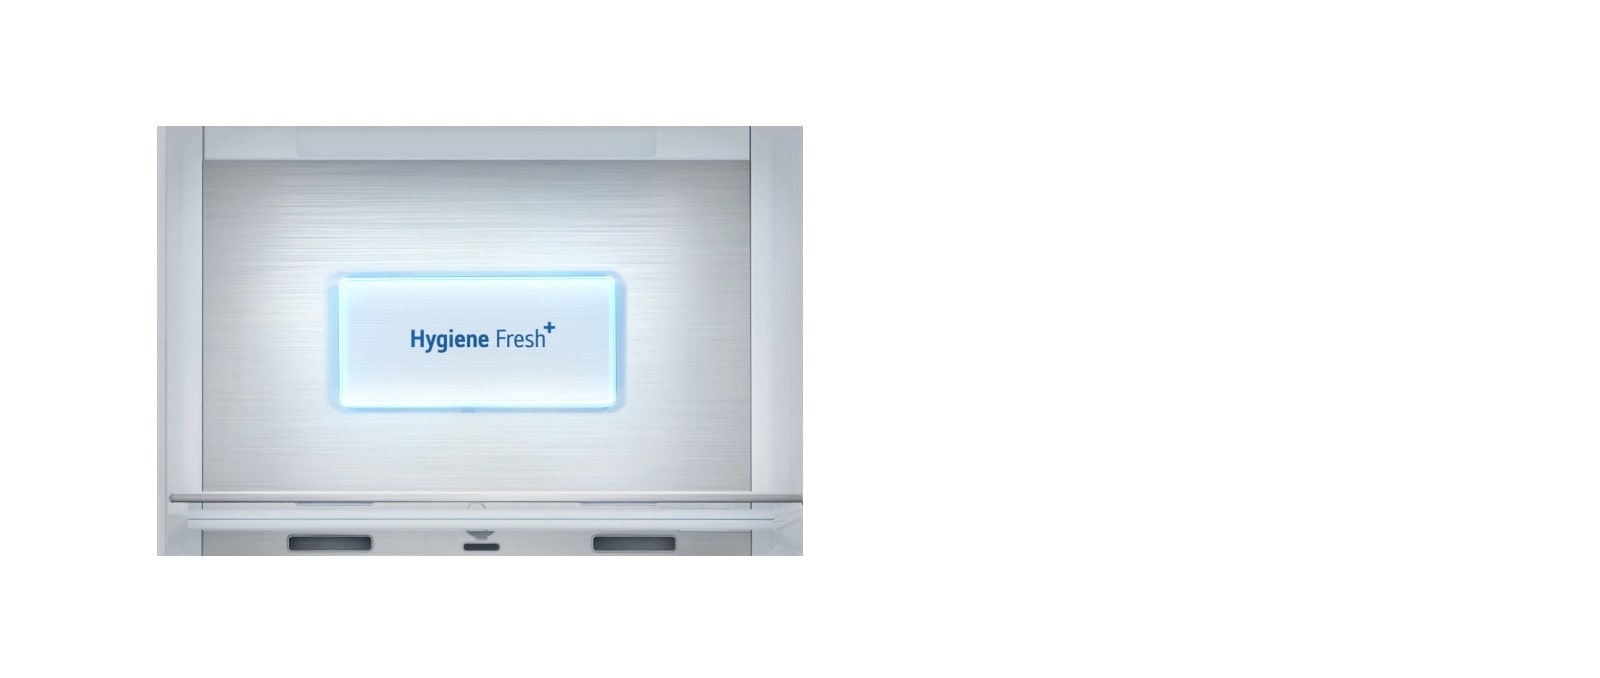 A video starts with a close up view of the "Hygiene Fresh+" panel on the refrigerator. Various bacteria fly around and then everything is sucked into the "Hygiene Fresh+" panel and a light shines across the panel.